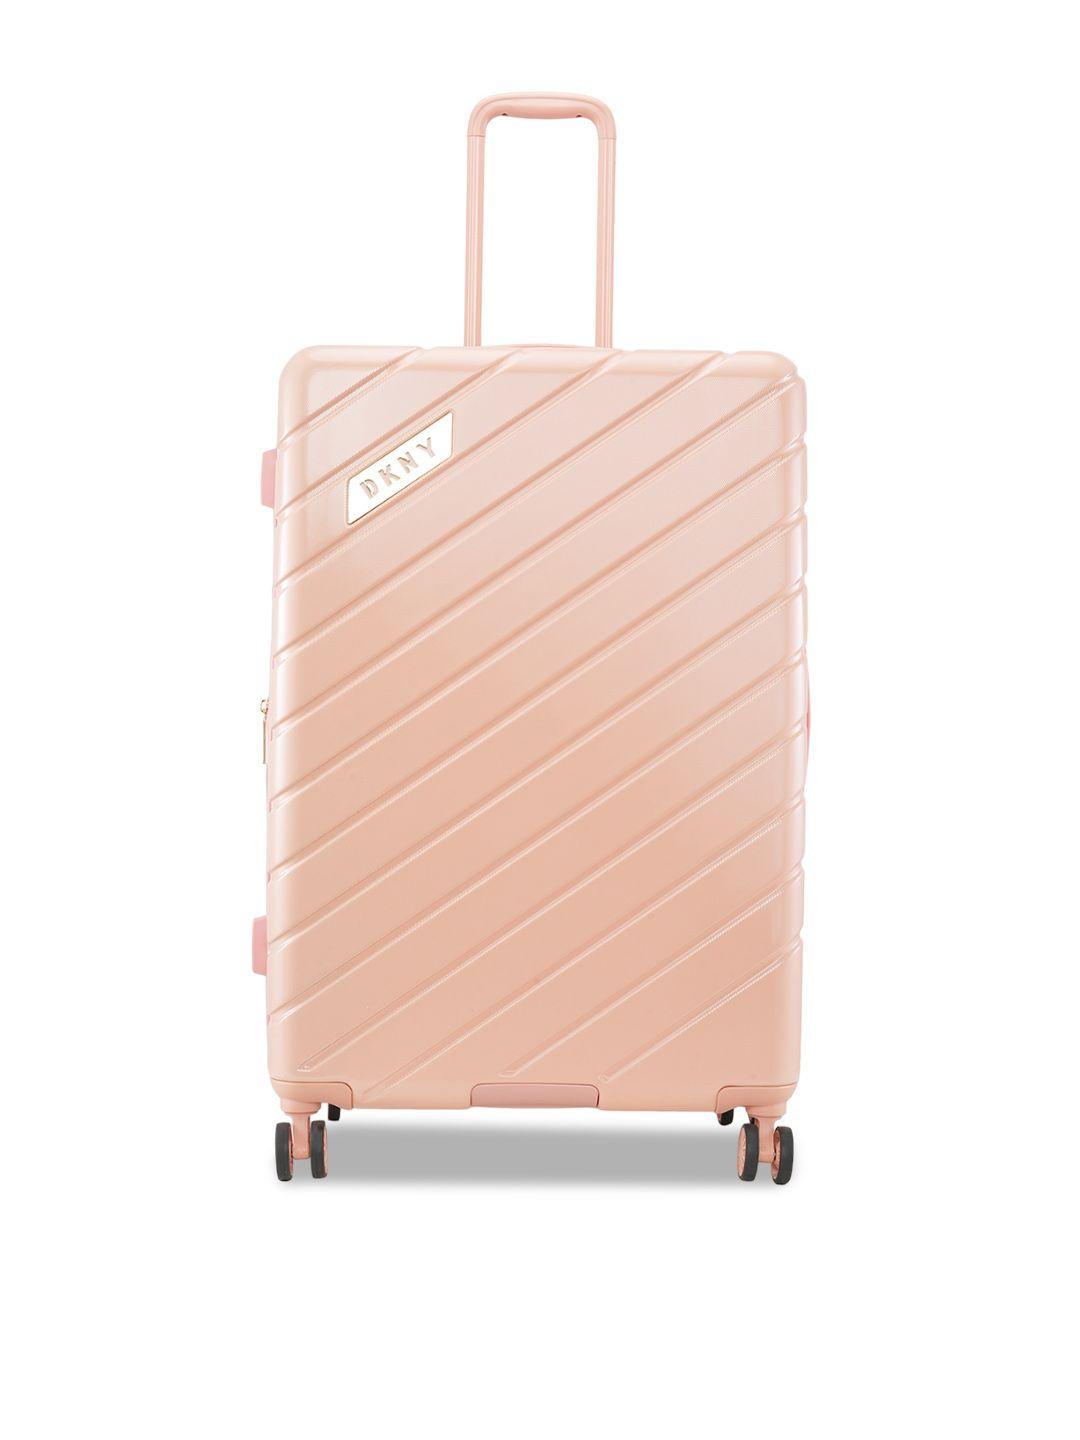 dkny textured abs material hard-sided large trolley suitcase